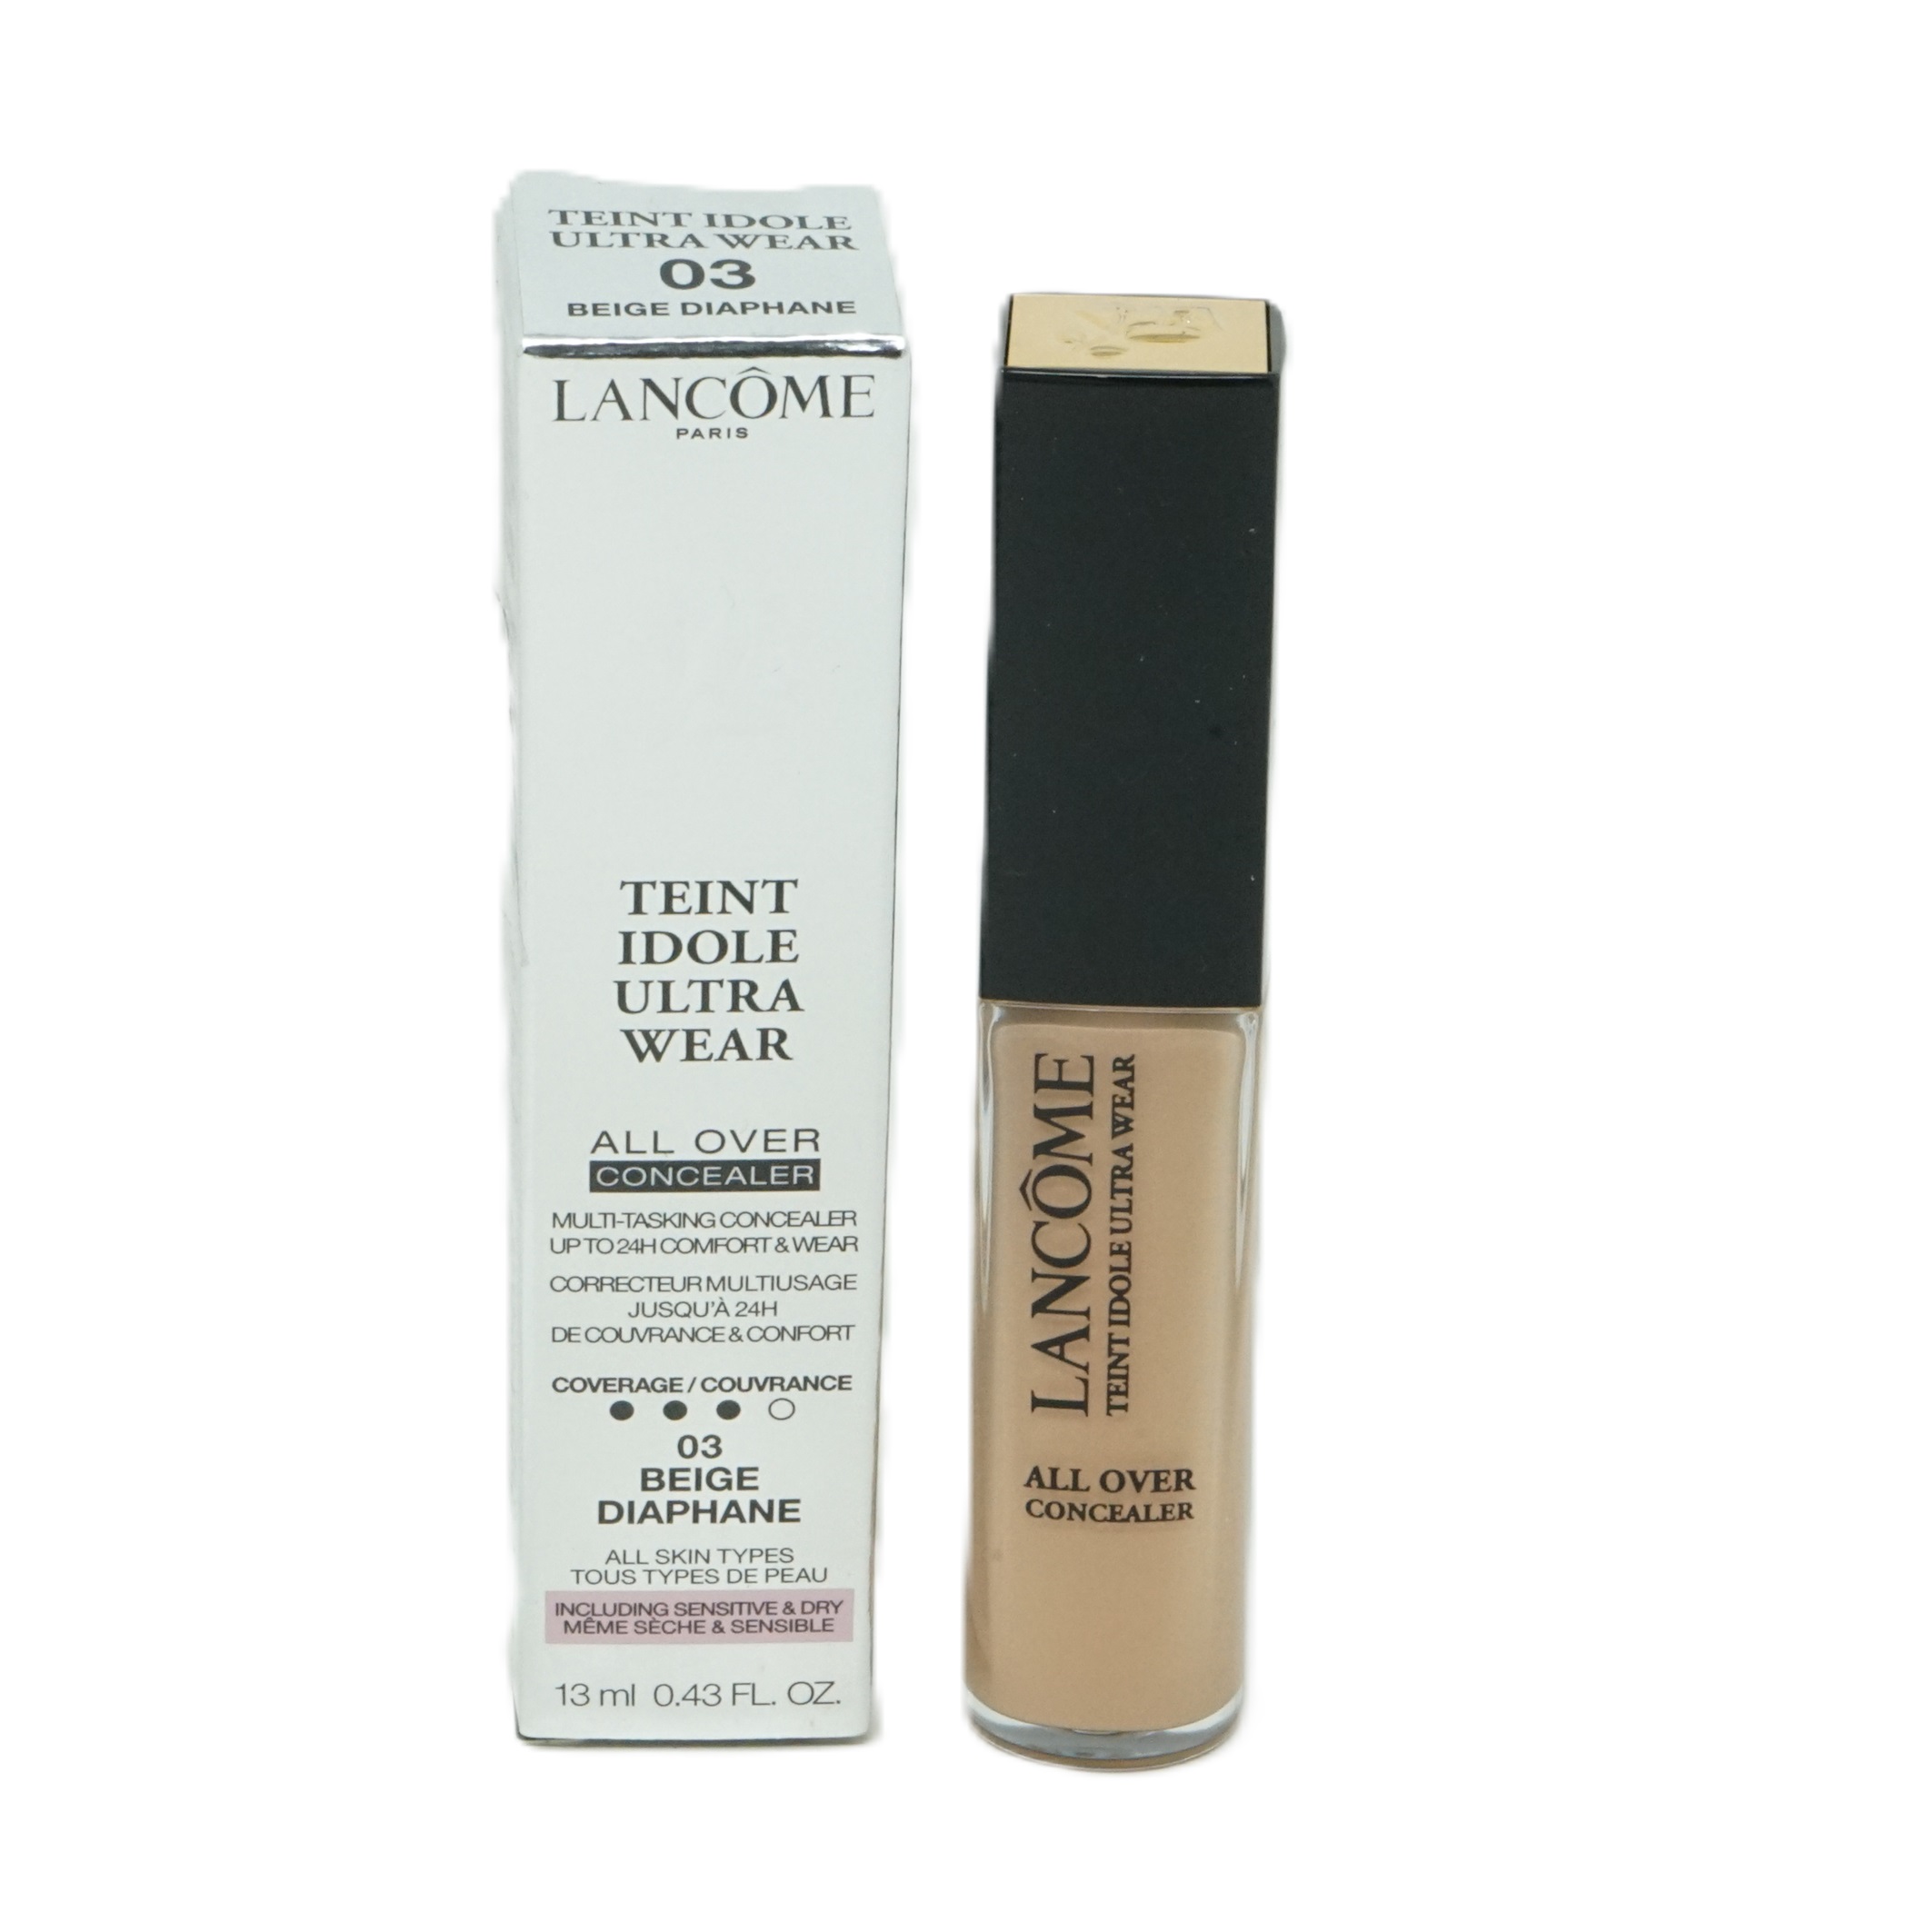 Lancome Teint Idole Ultra Wear All Over Conceale Sensitive & Dry 13ml Beige Diaphane 03